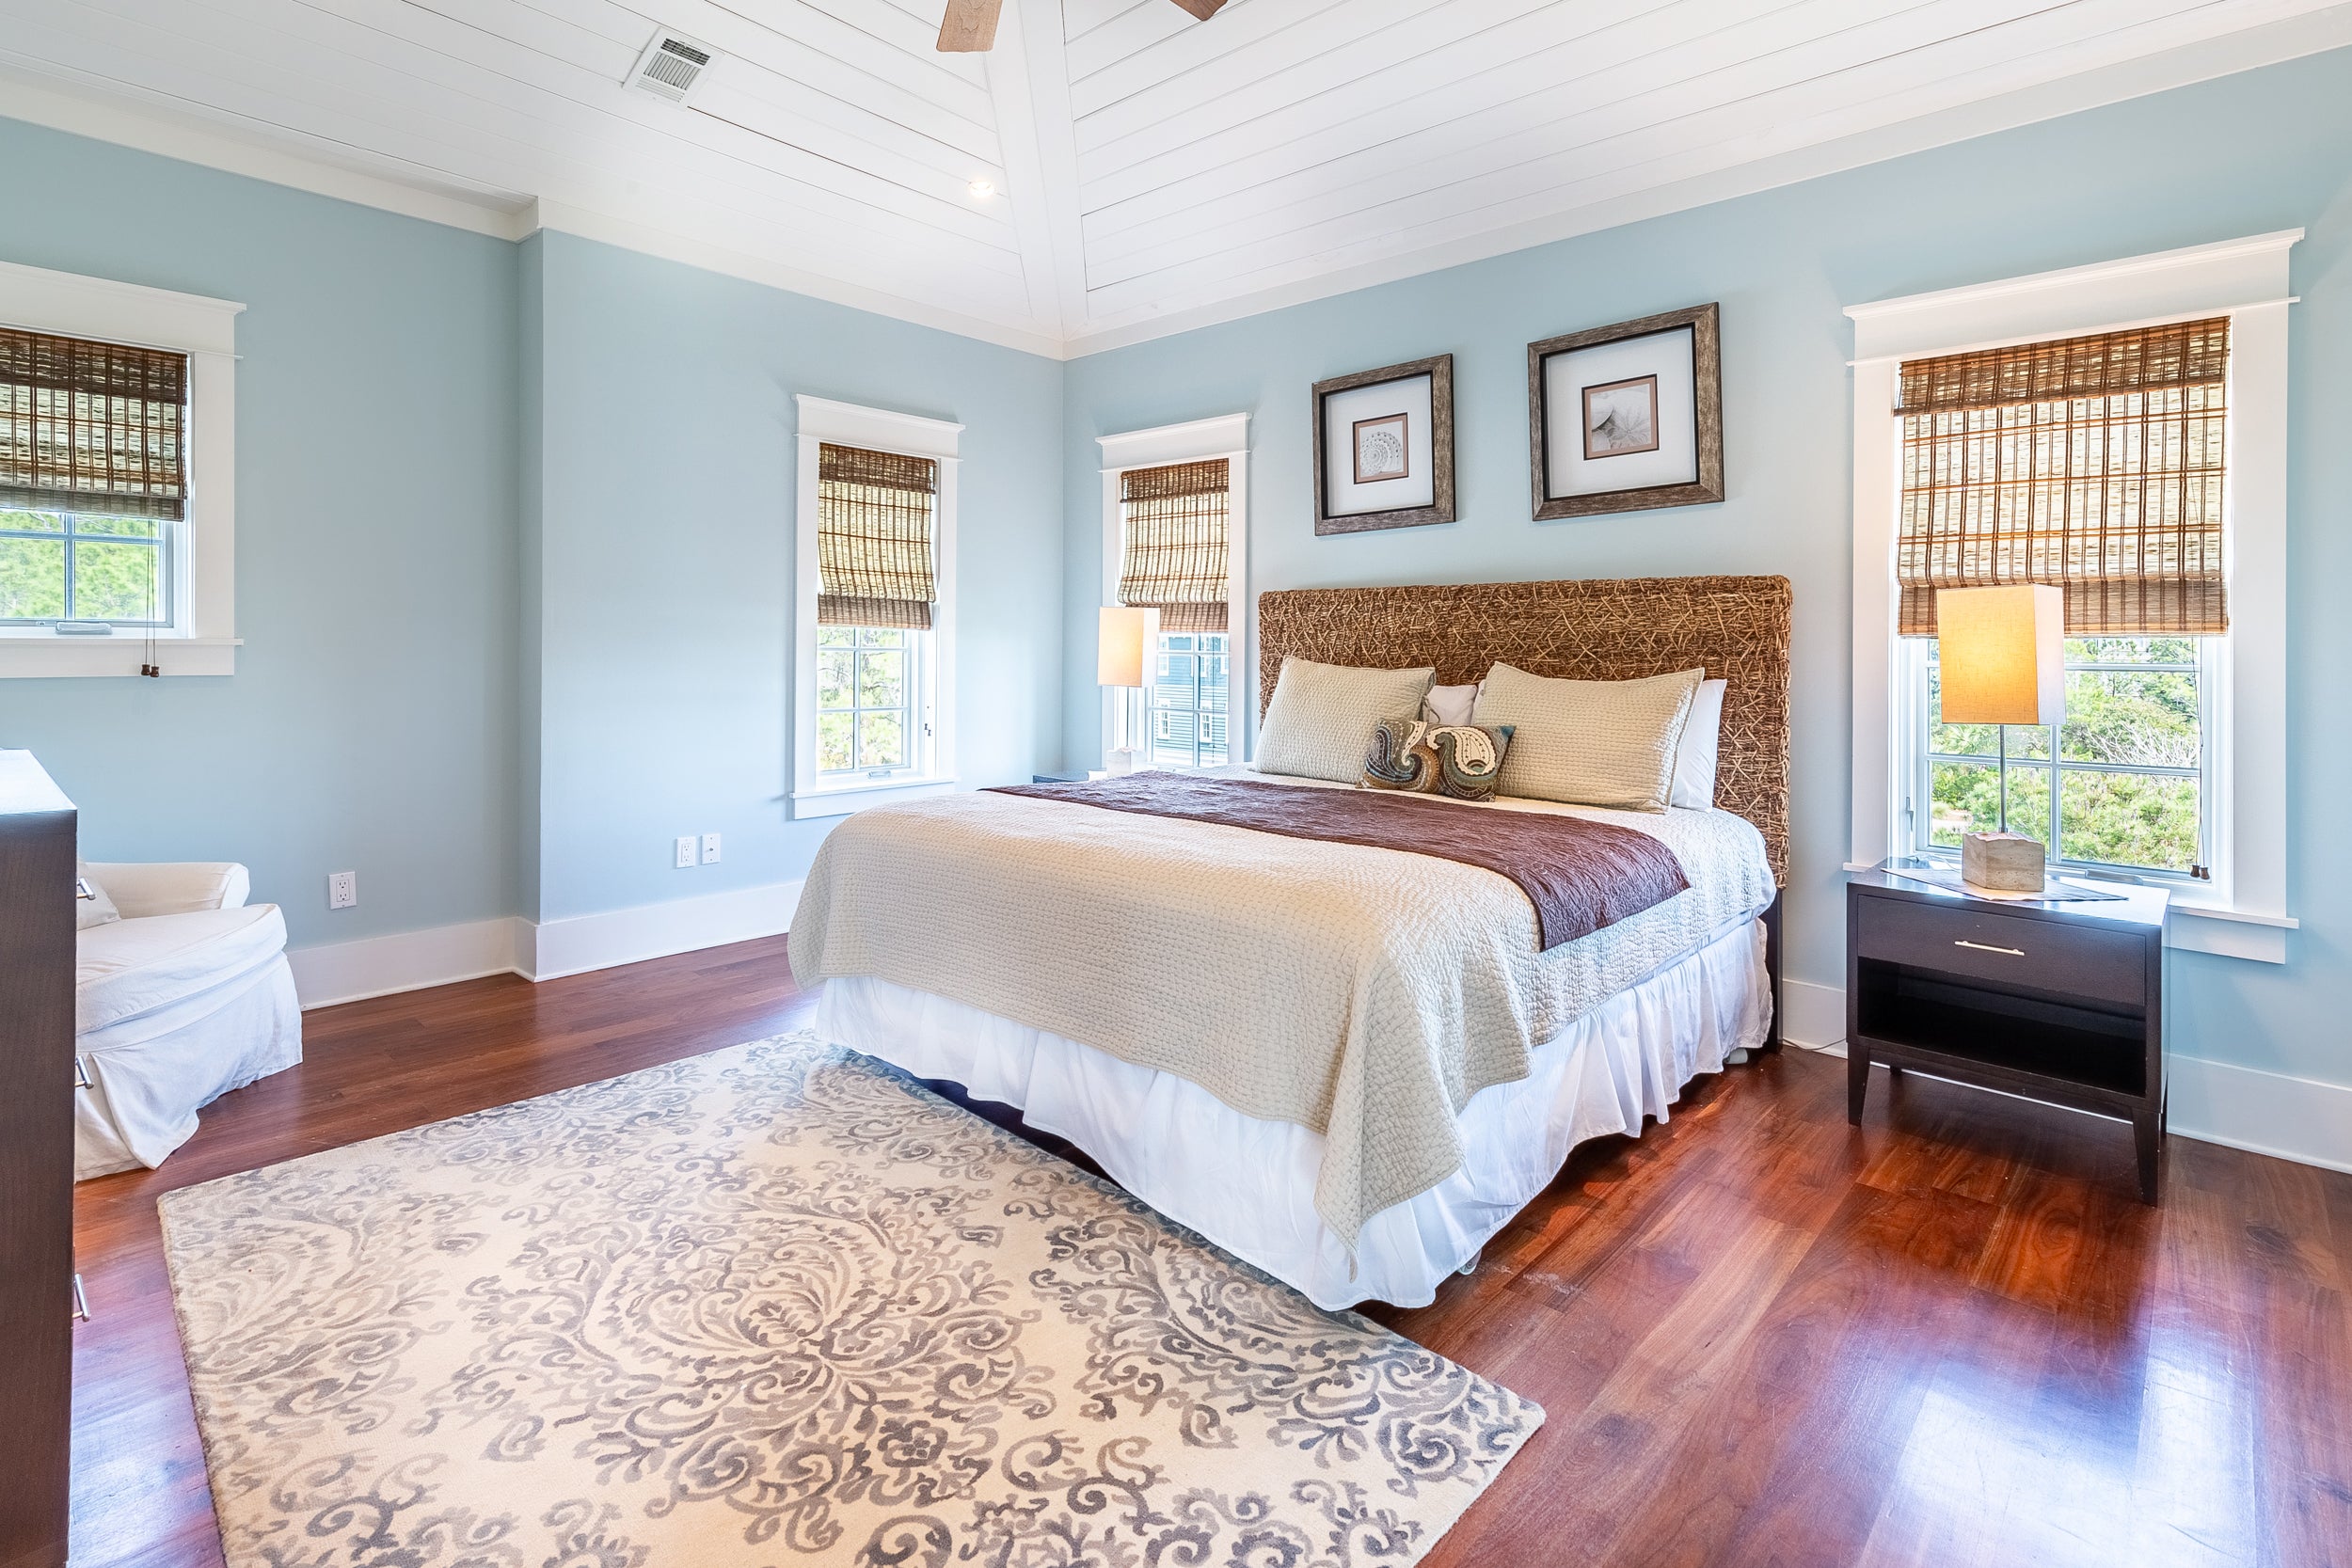 Large and beautiful master bedroom